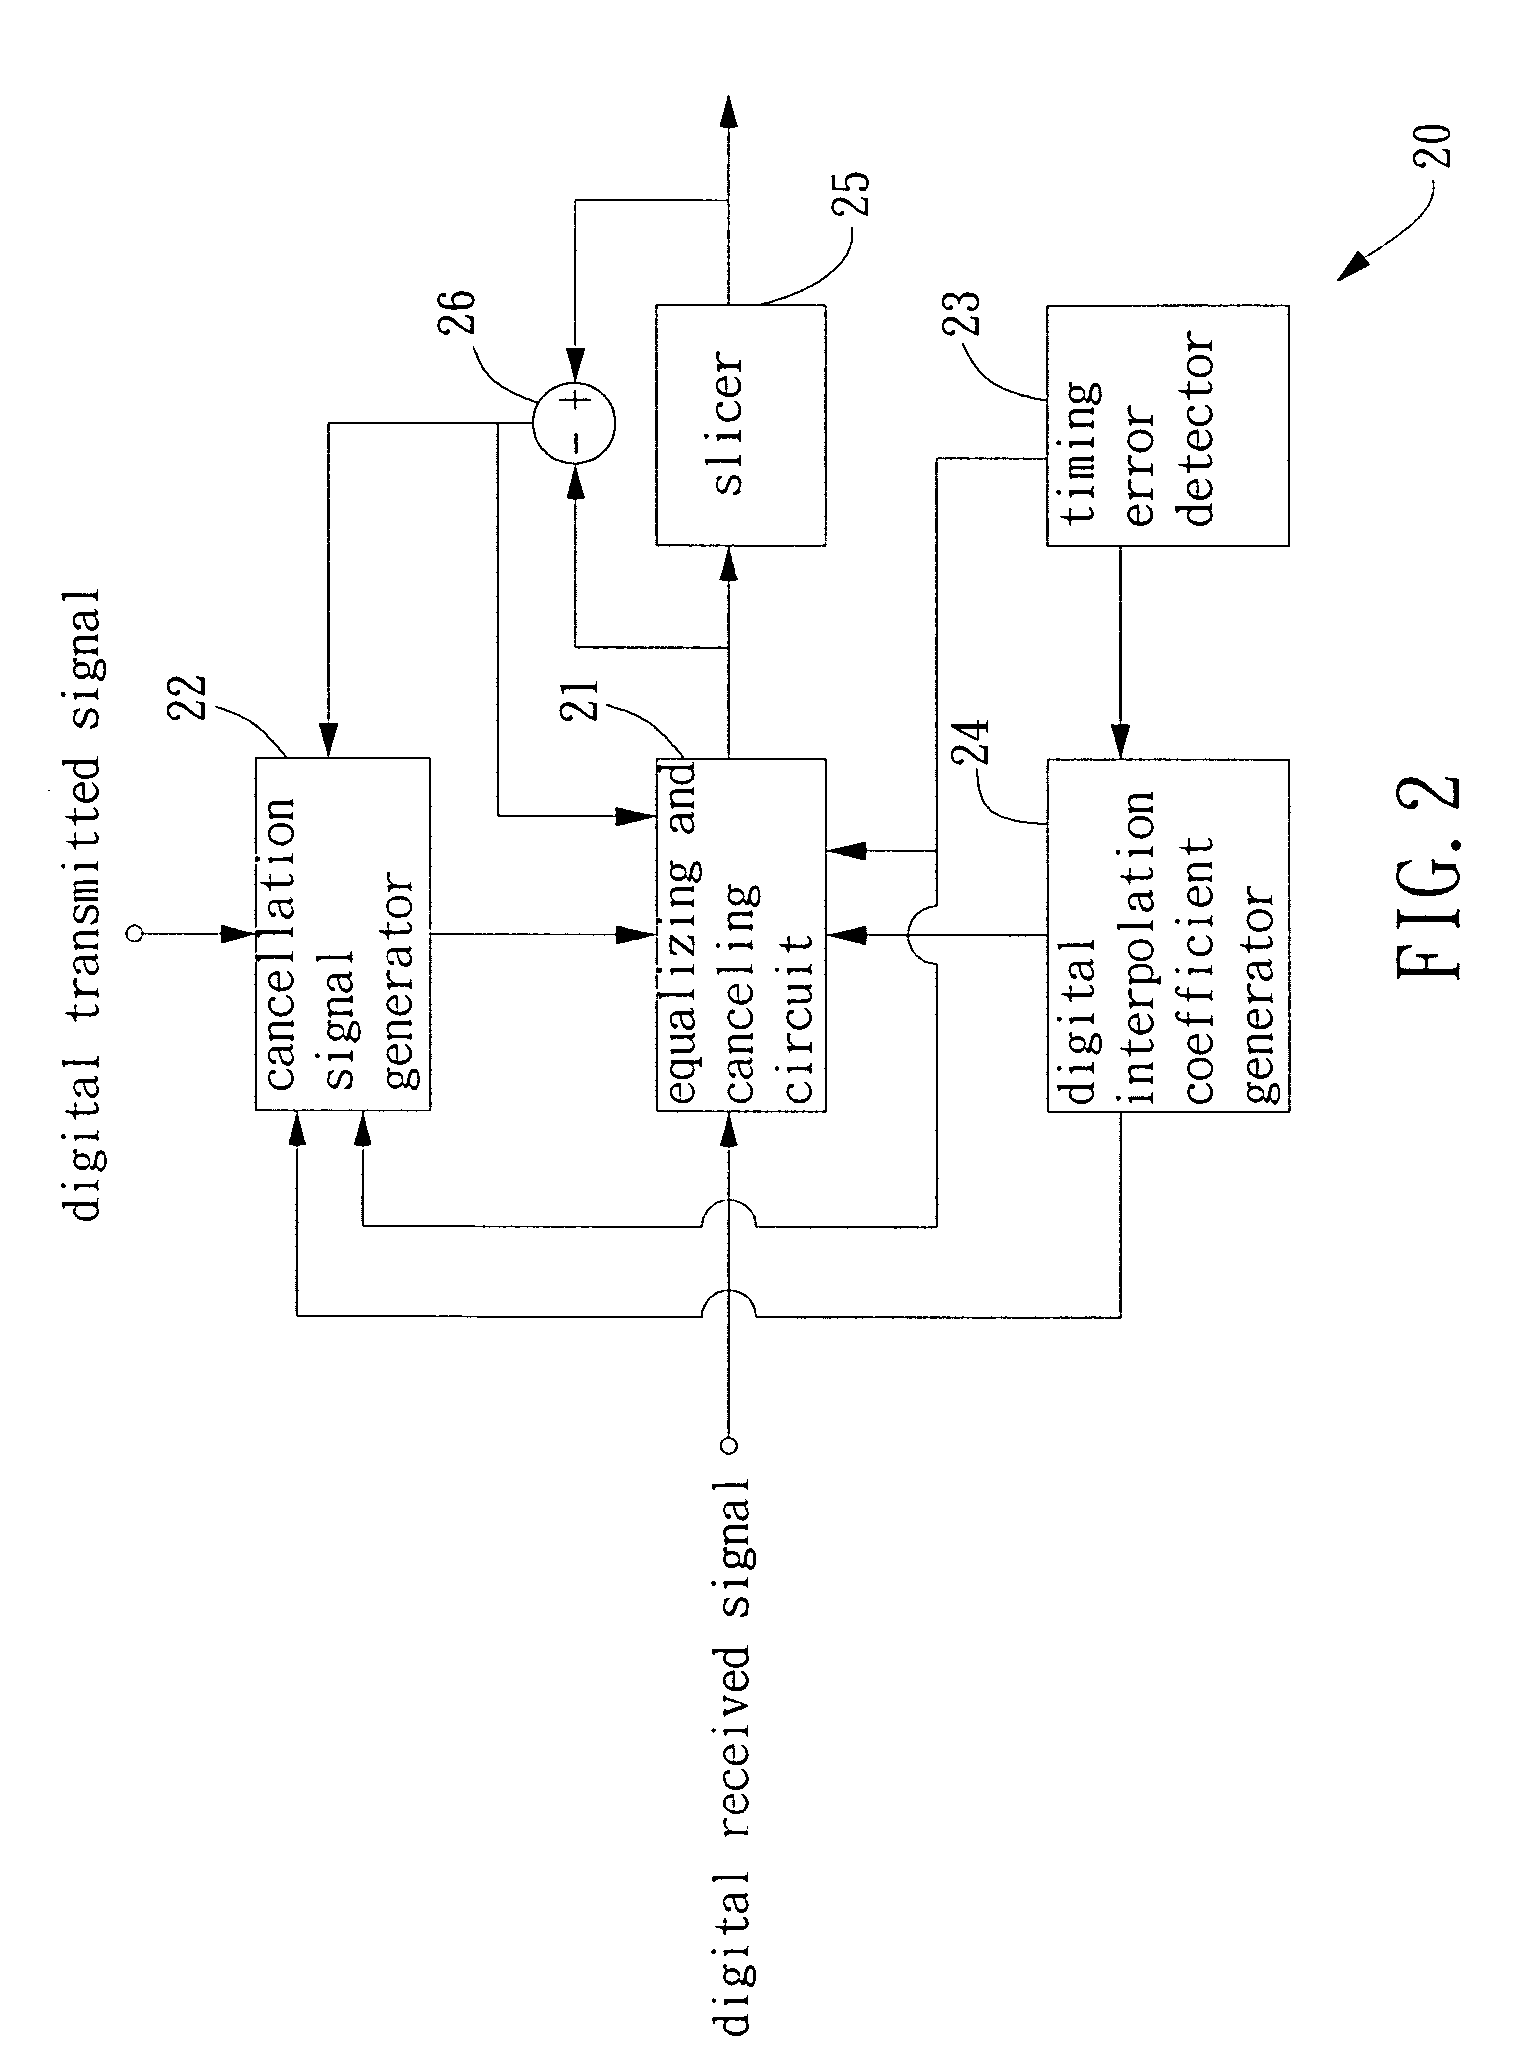 Digitally synchronized receiving device and associated signal processing method